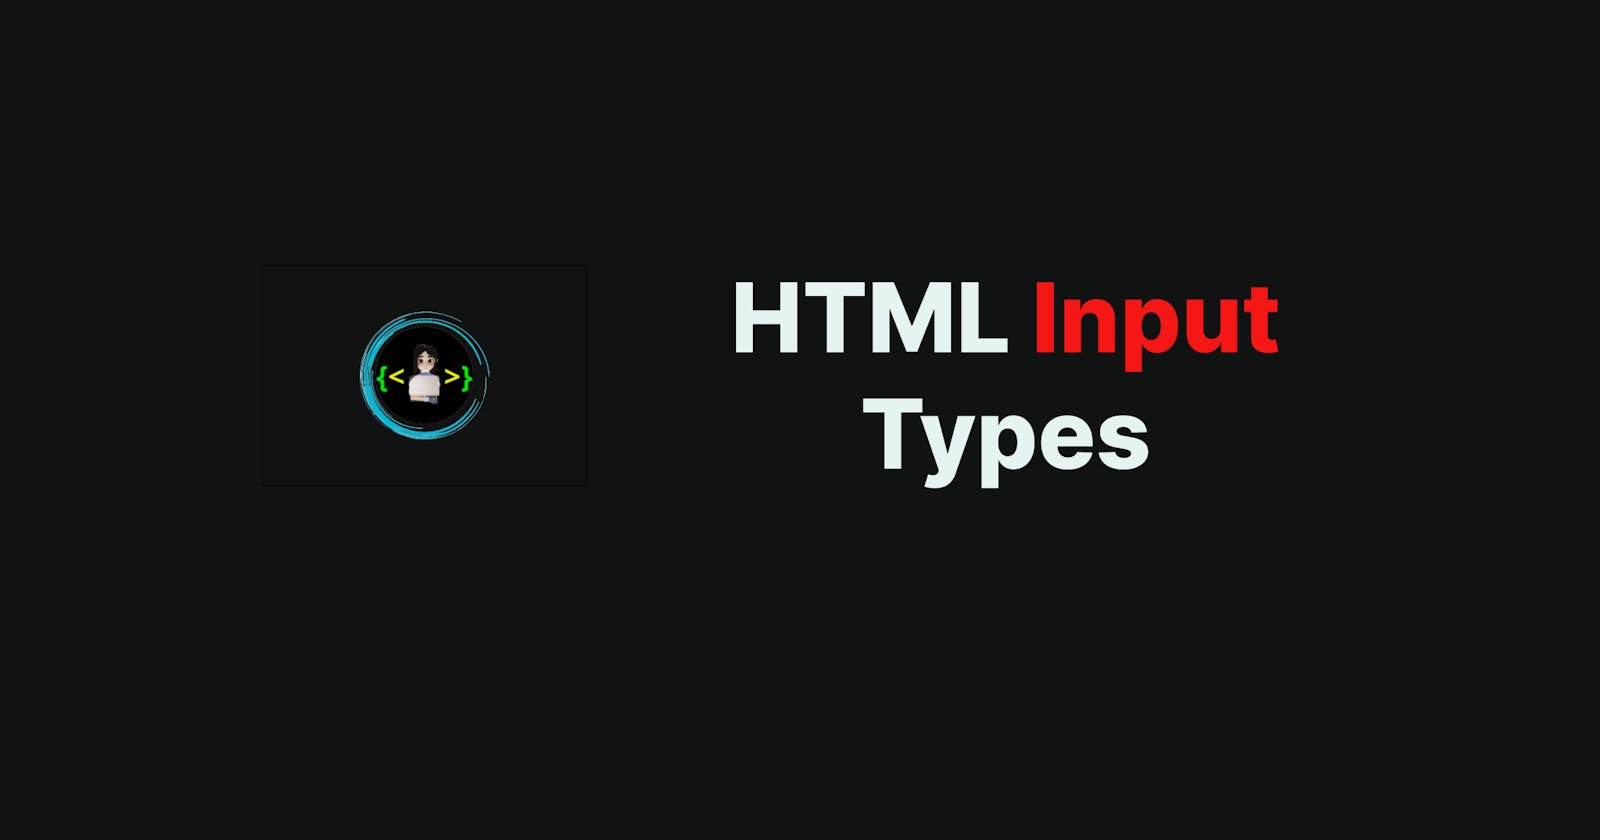 How many types of input are there in HTML🙄?